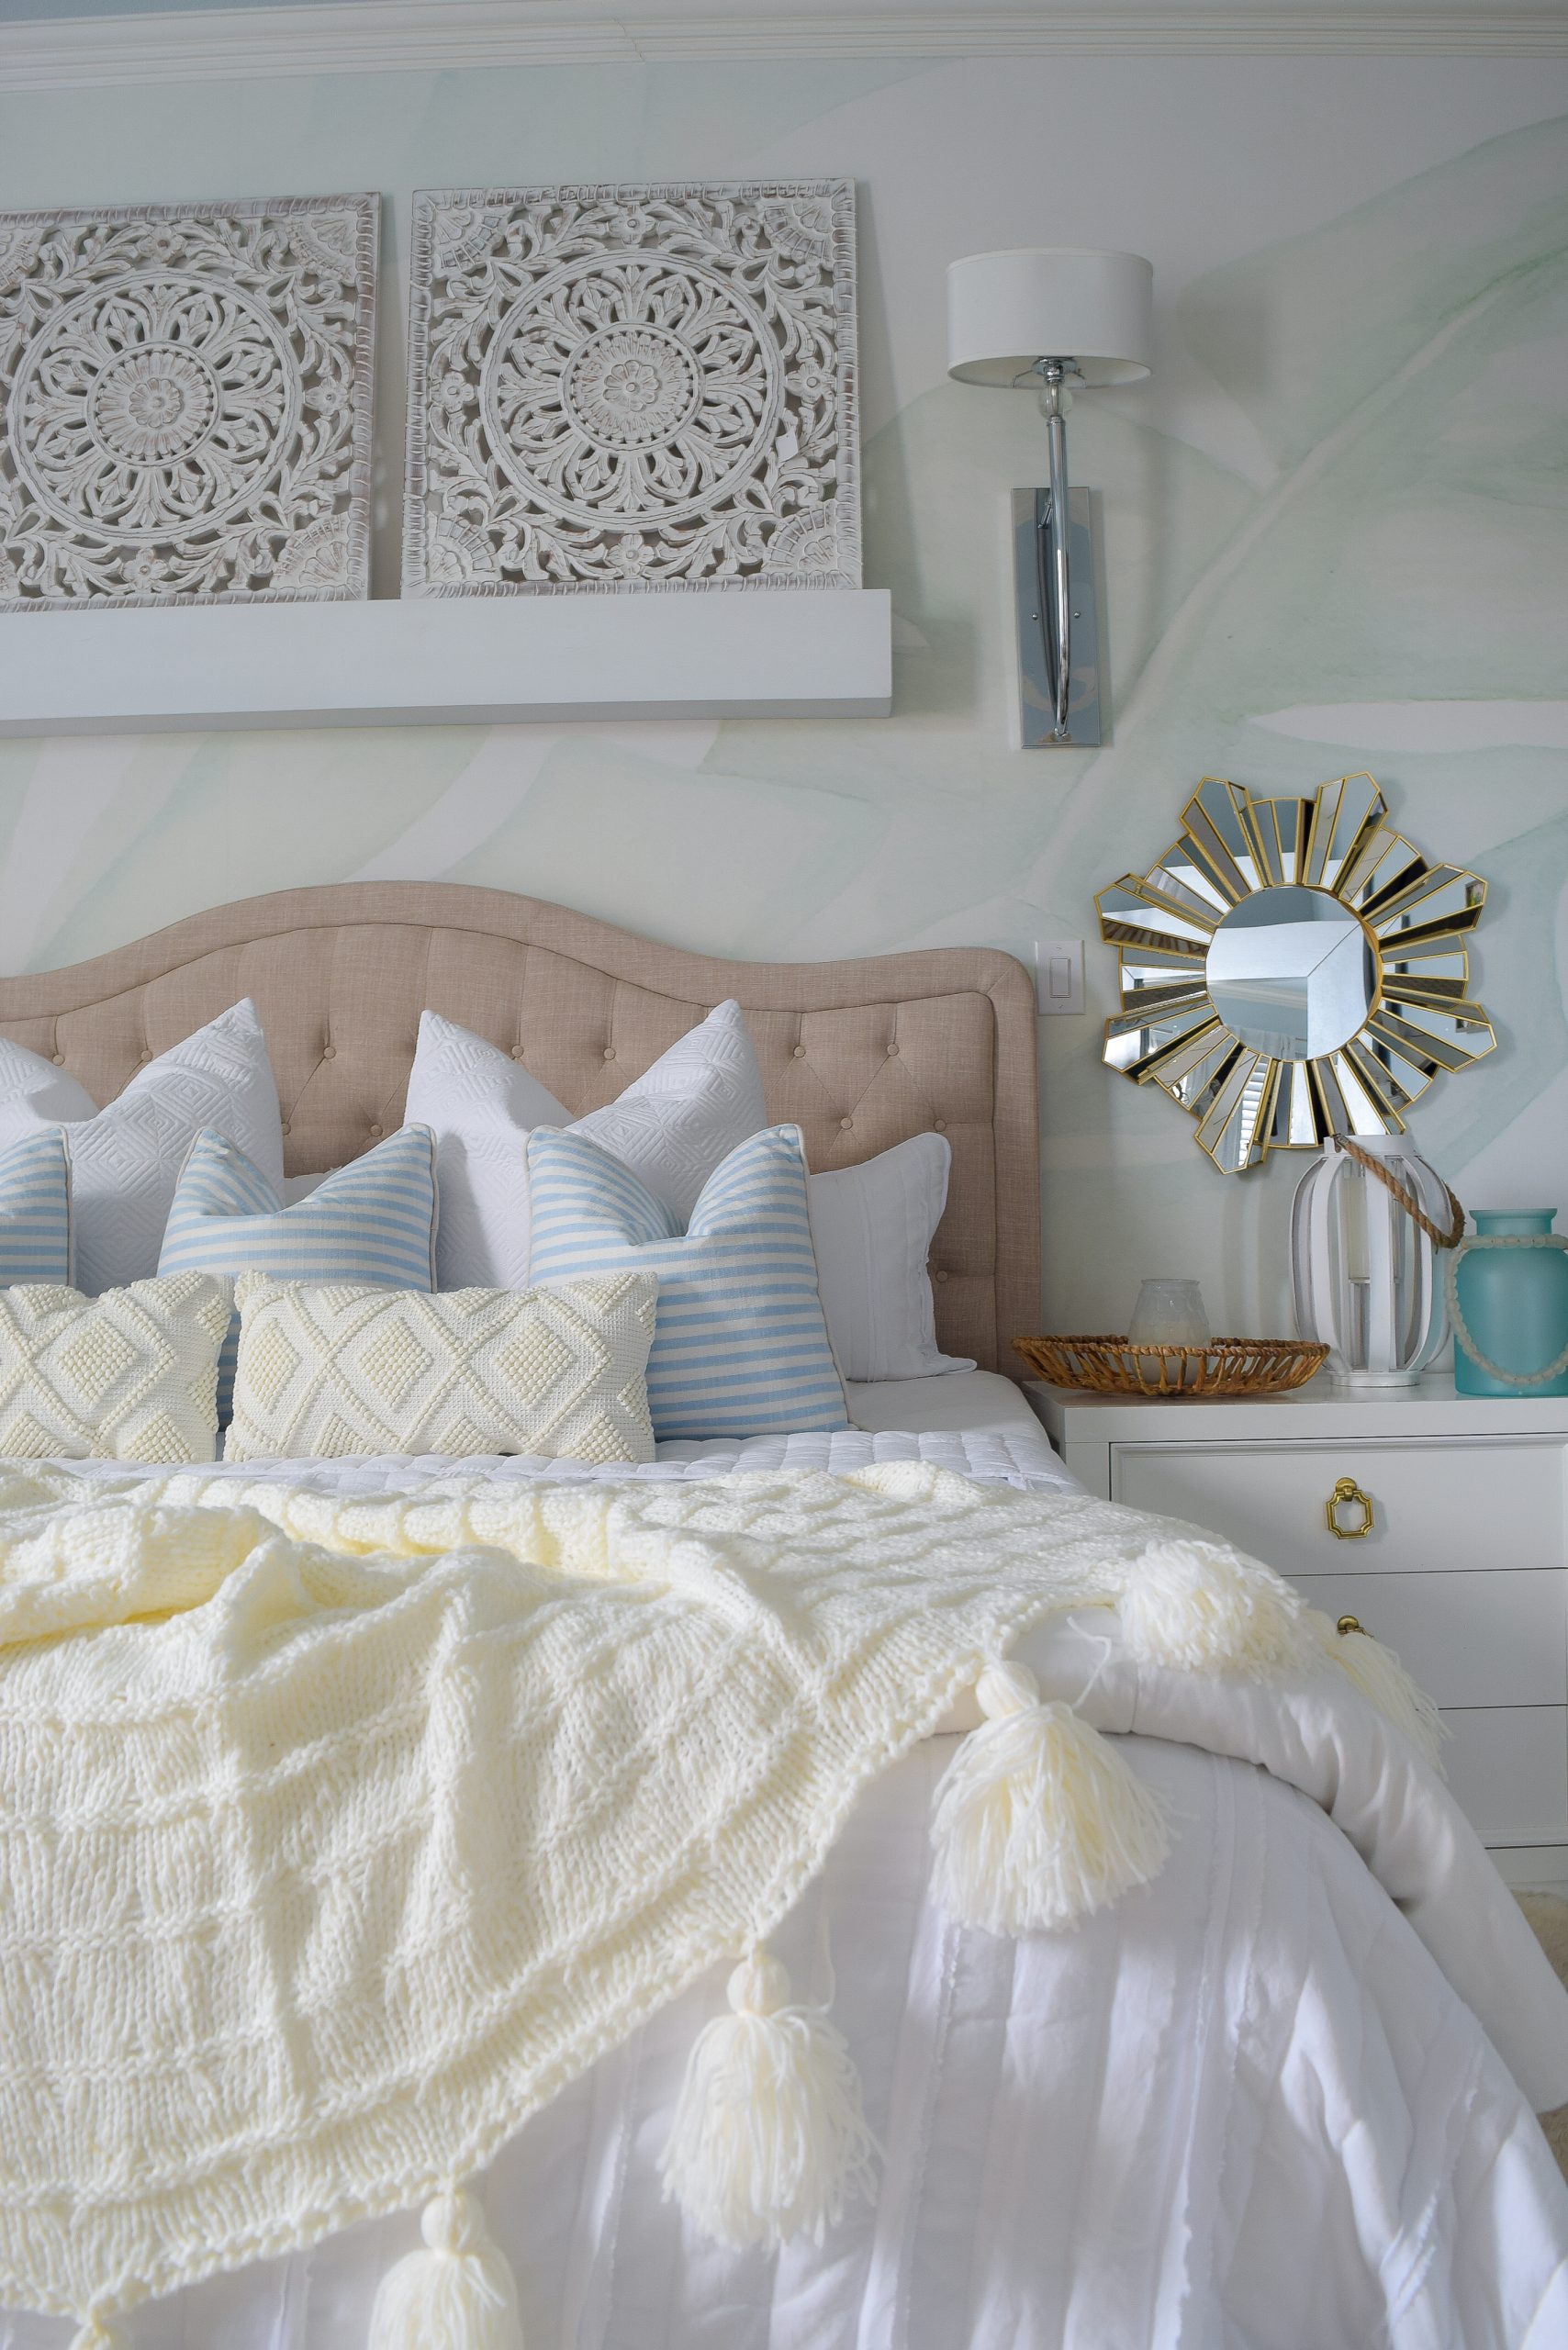 5 Easy + Affordable Summer Bedroom Decorating Ideas » We\'re The ...